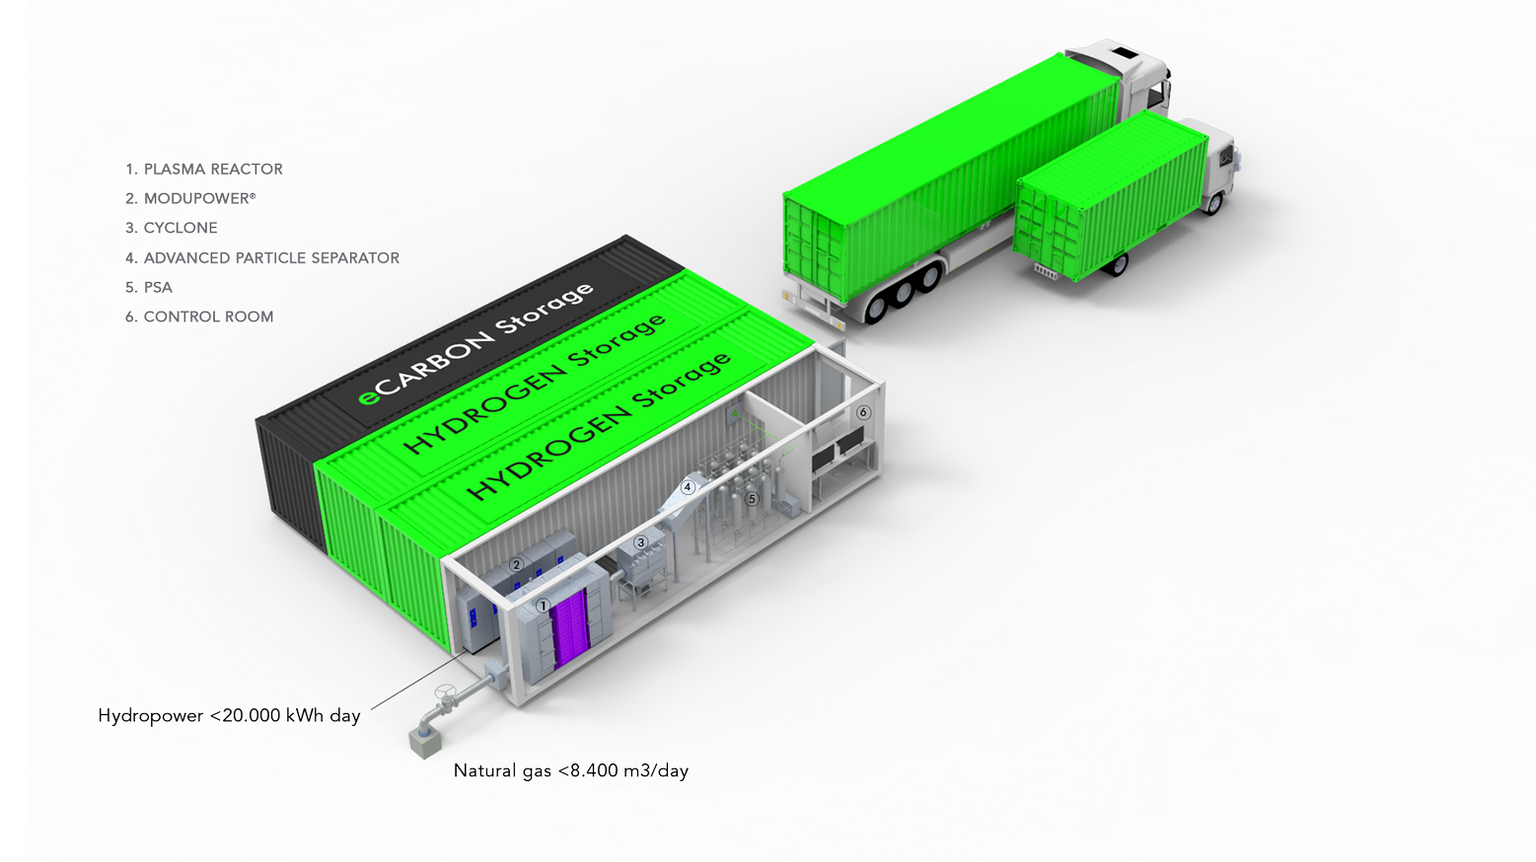 Illustration with trucks and green containers